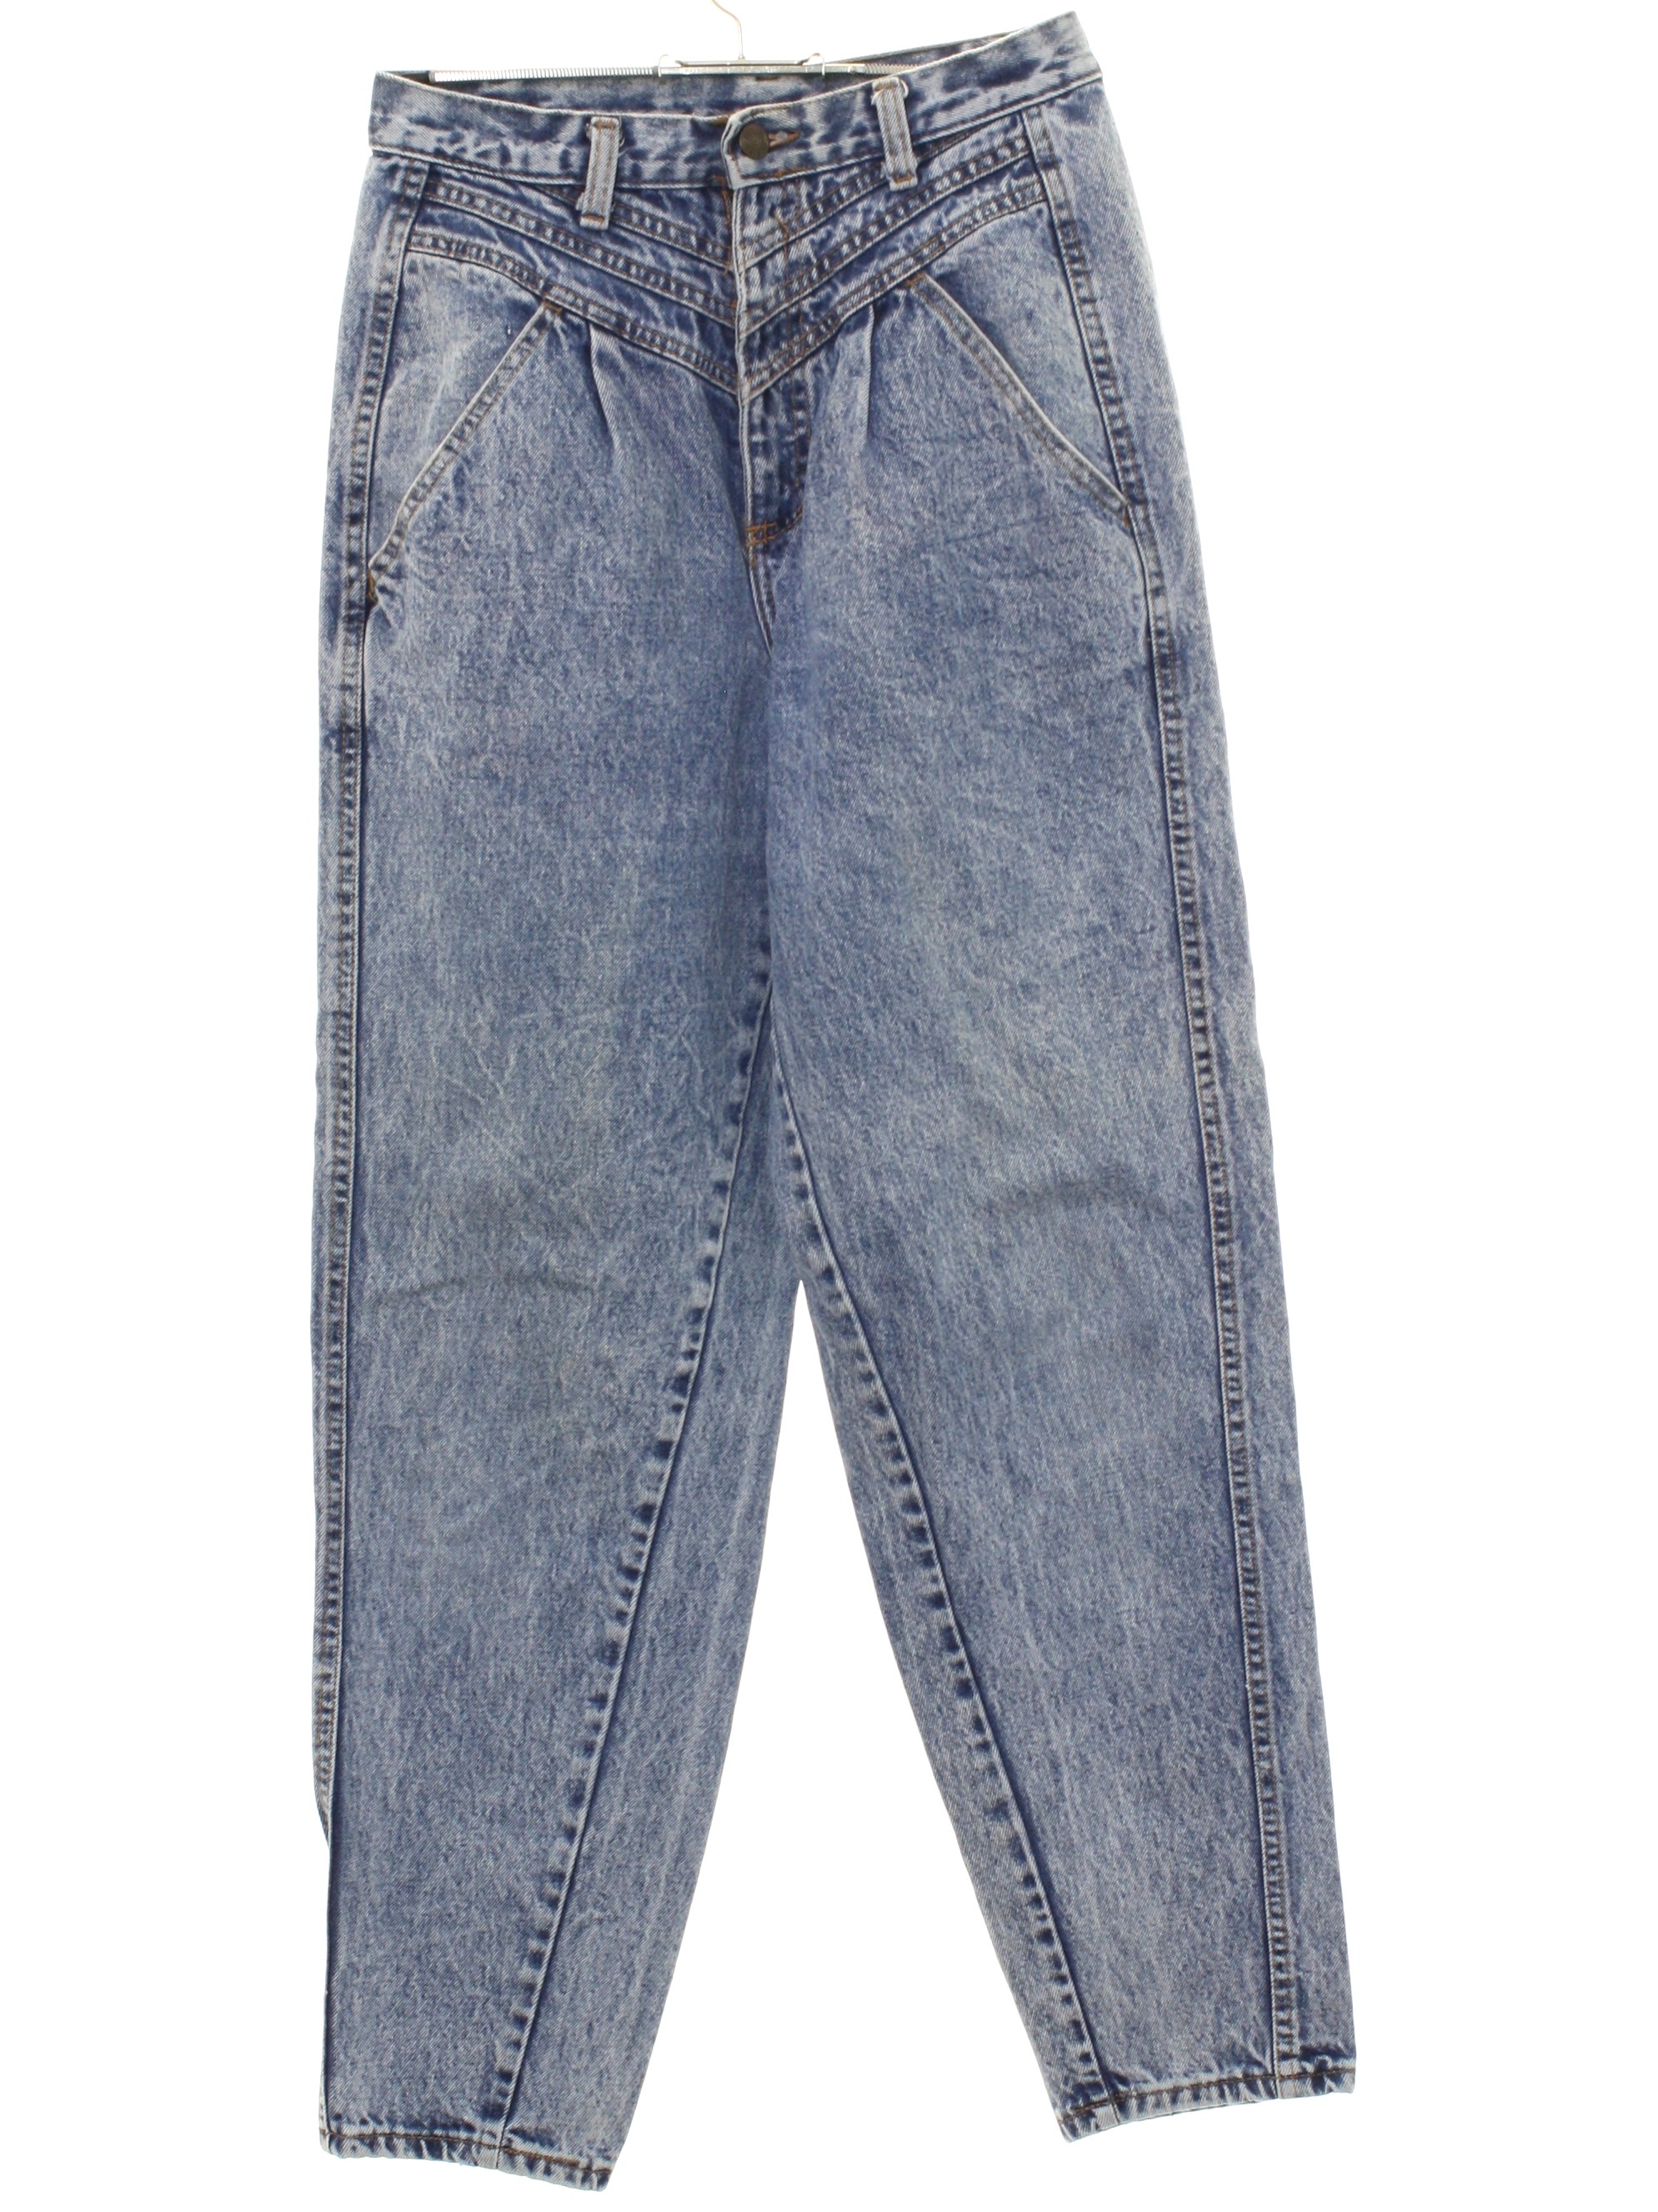 Ord Meander reservedele 80s Retro Pants: 80s -Zena USA- Womens acid wash blue cotton denim high  waisted totally 80s tapered leg baggy fit jeans pants with diagonal side  entry front pockets, no back pockets. Slightly